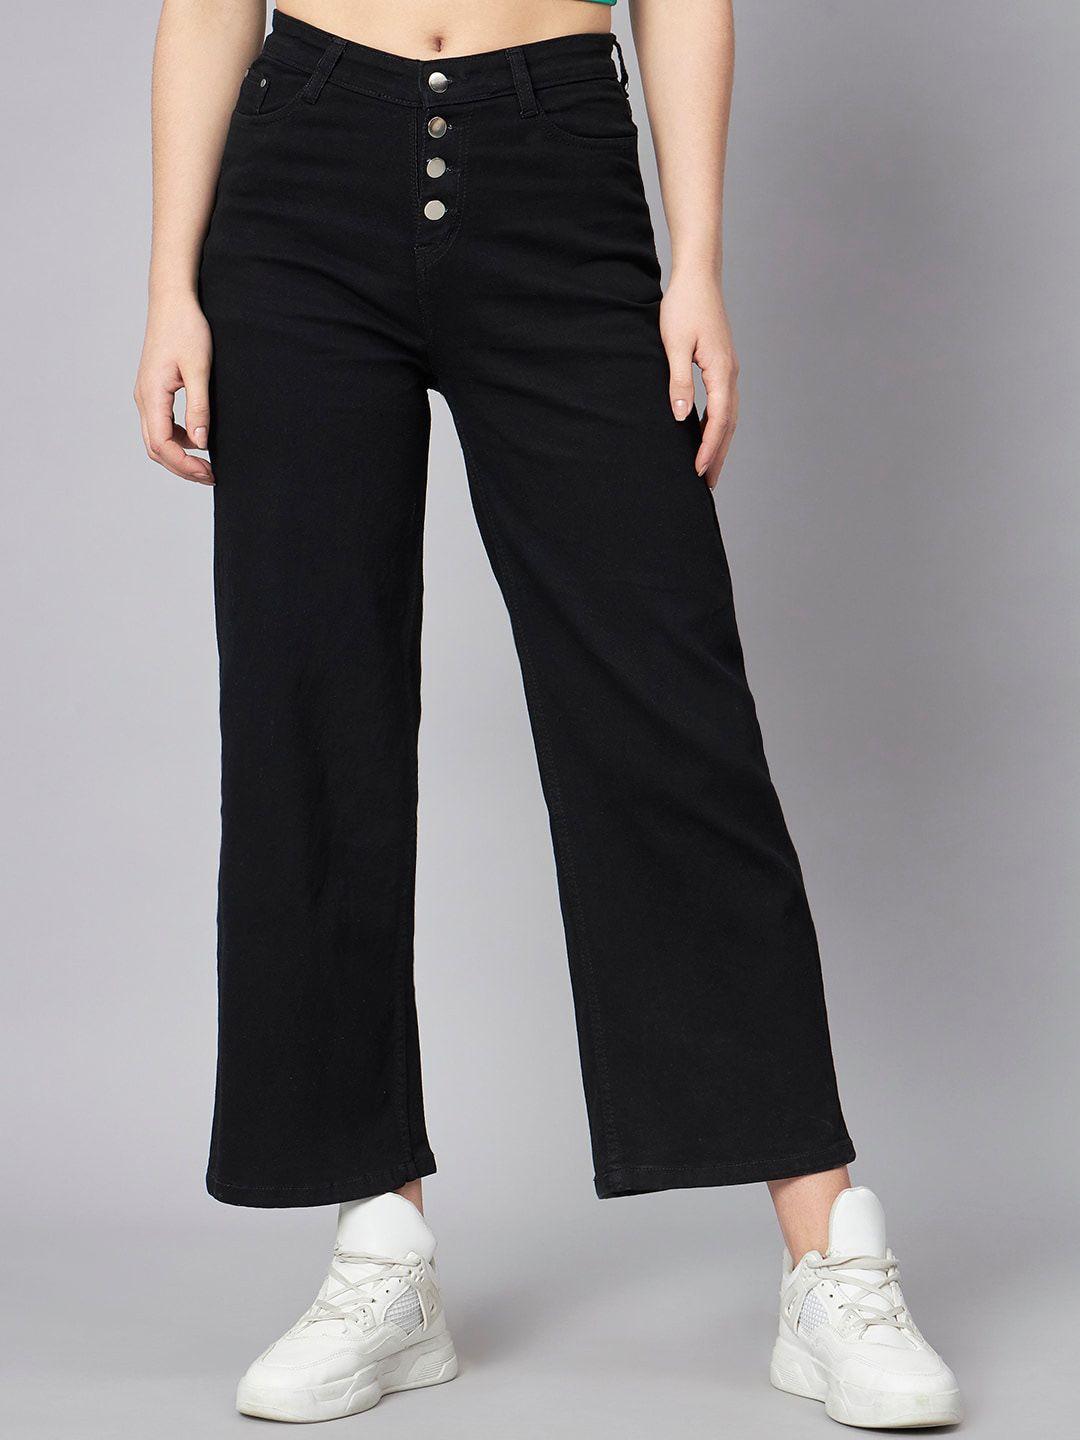 the dry state women black relaxed fit non stretchable cotton jeans